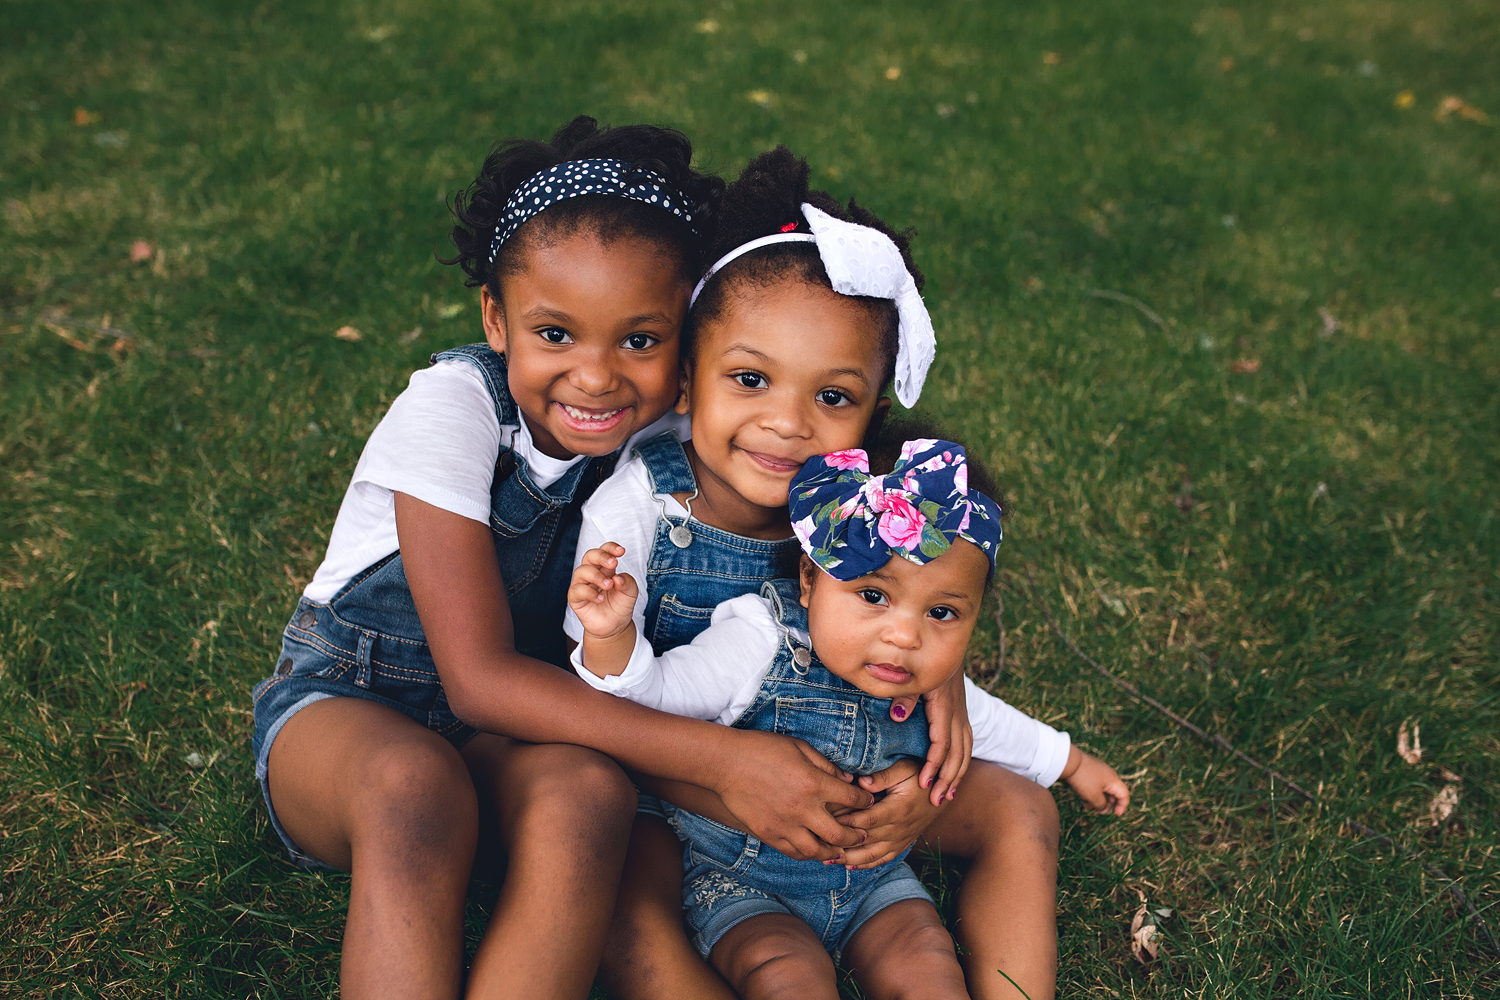 Three adorable sisters take a picture in the grass wearing jean overalls and a white t-shirt. Aren't they just one adorable family?